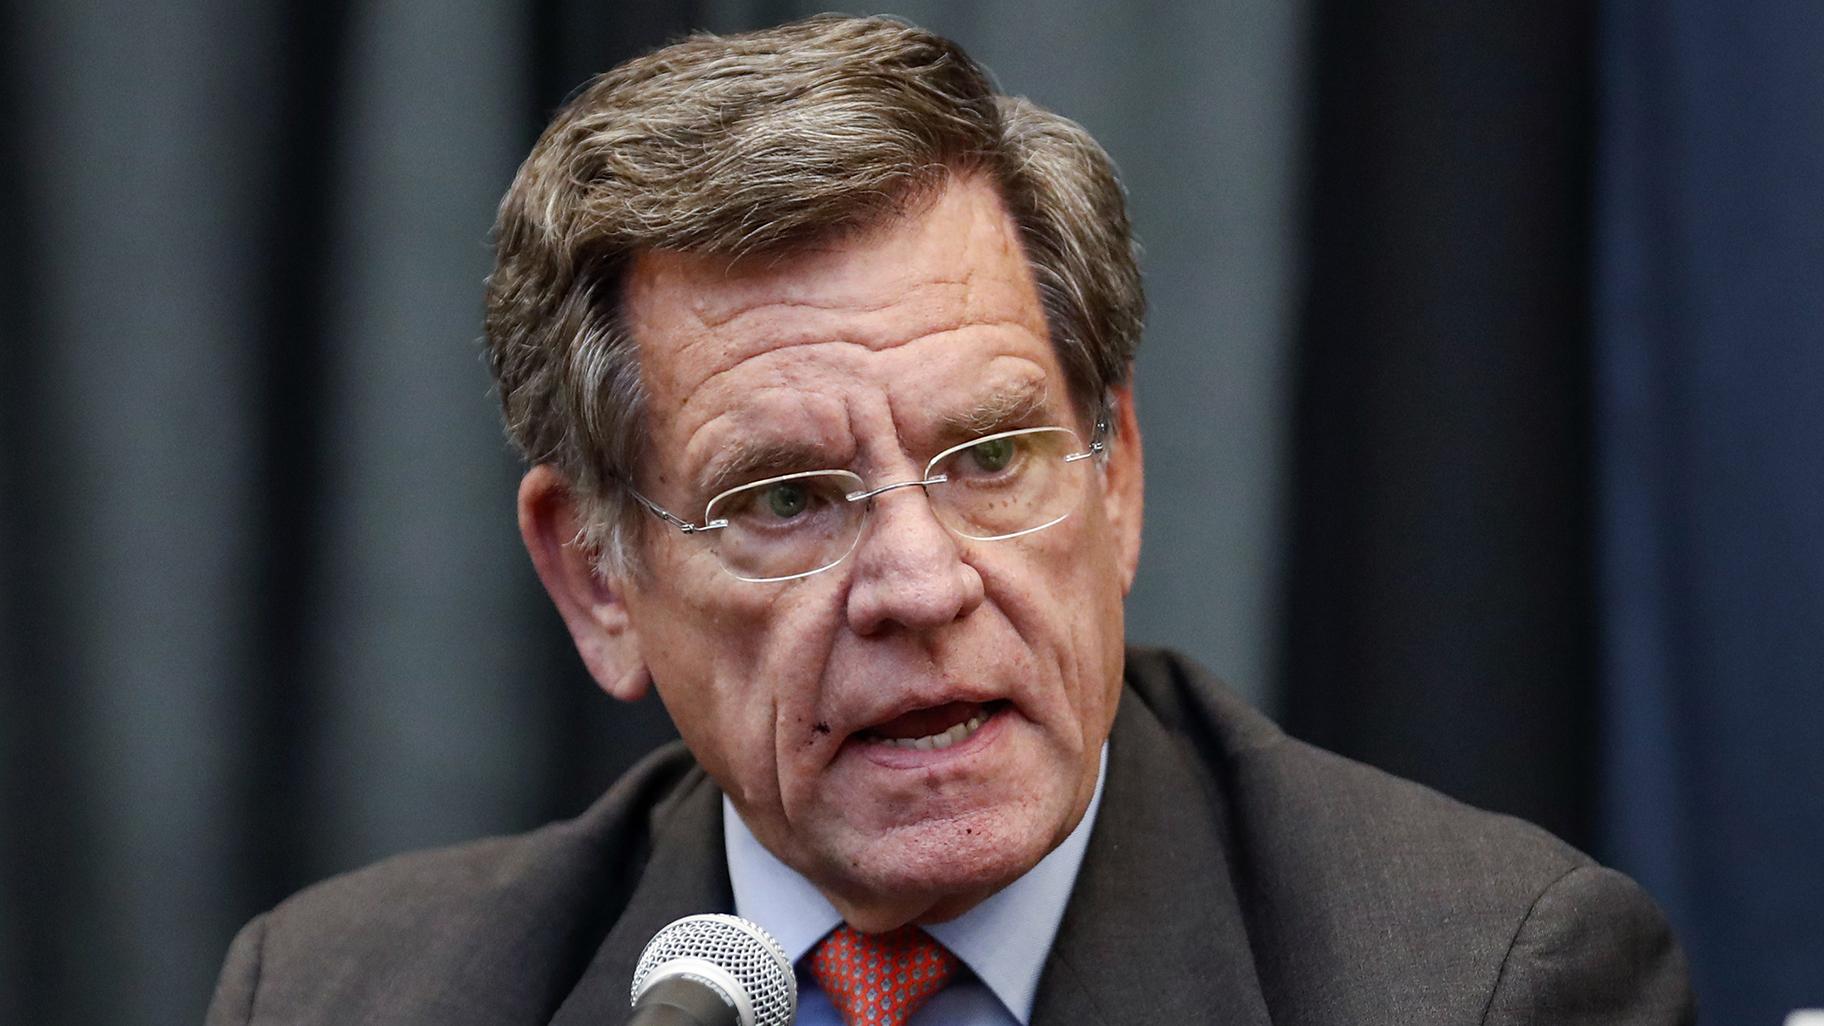 Chicago Blackhawks owner Rocky Wirtz speaks during a news conference in 2018 in Chicago. (AP Photo / Kamil Krzaczynski, File)